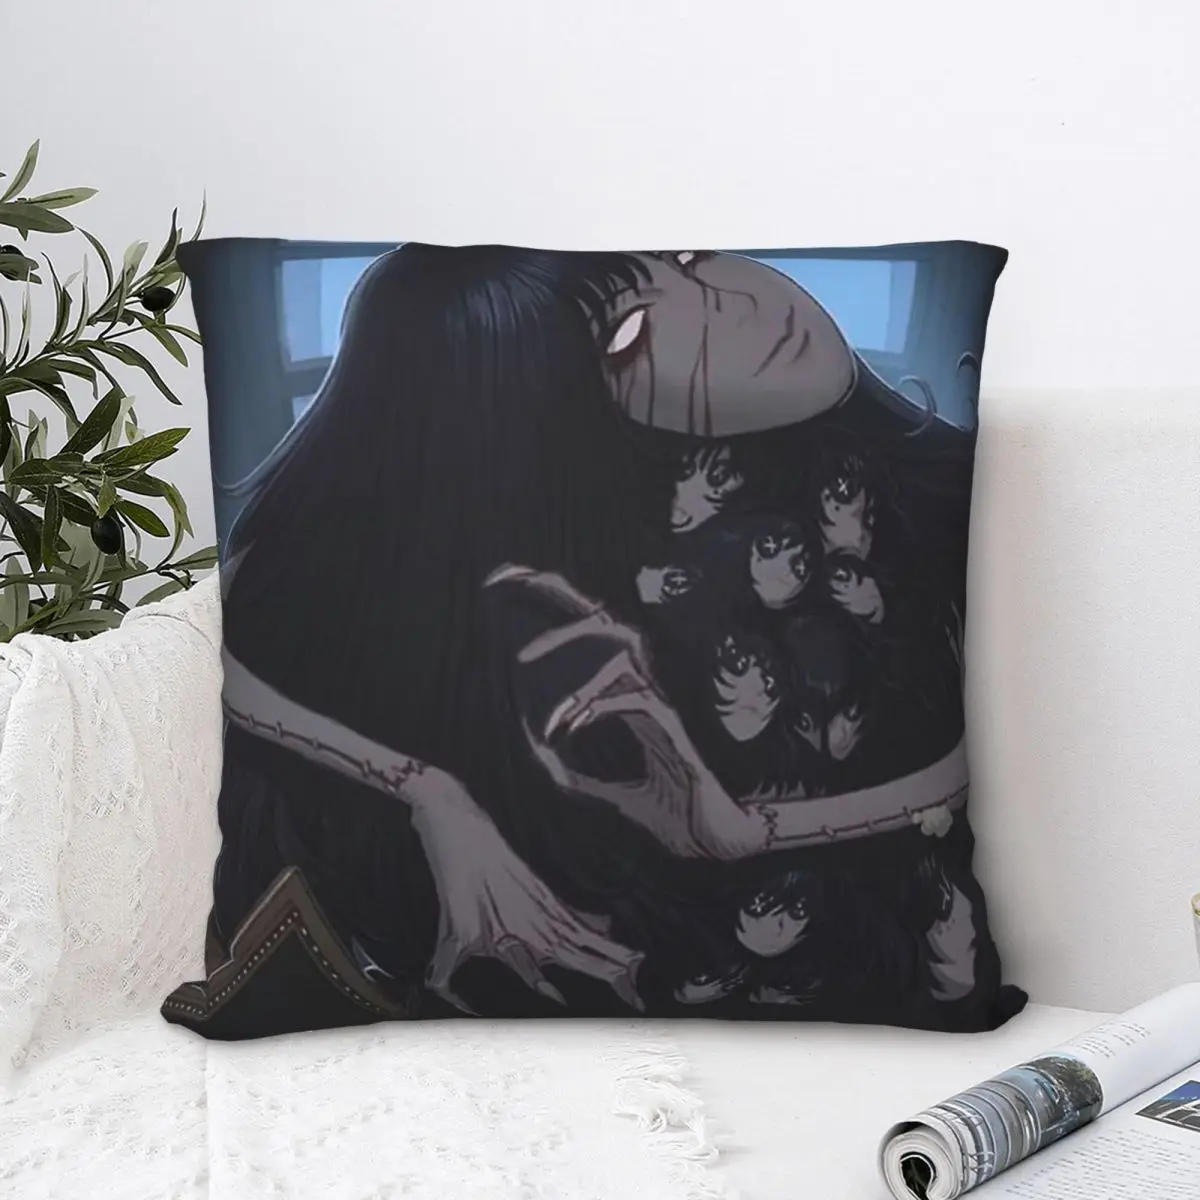 

Black Sad Girl Polyester Cushion Cover Junji Ito Horror Thriller Comics Writer Bedroom Chair Decorative Breathable